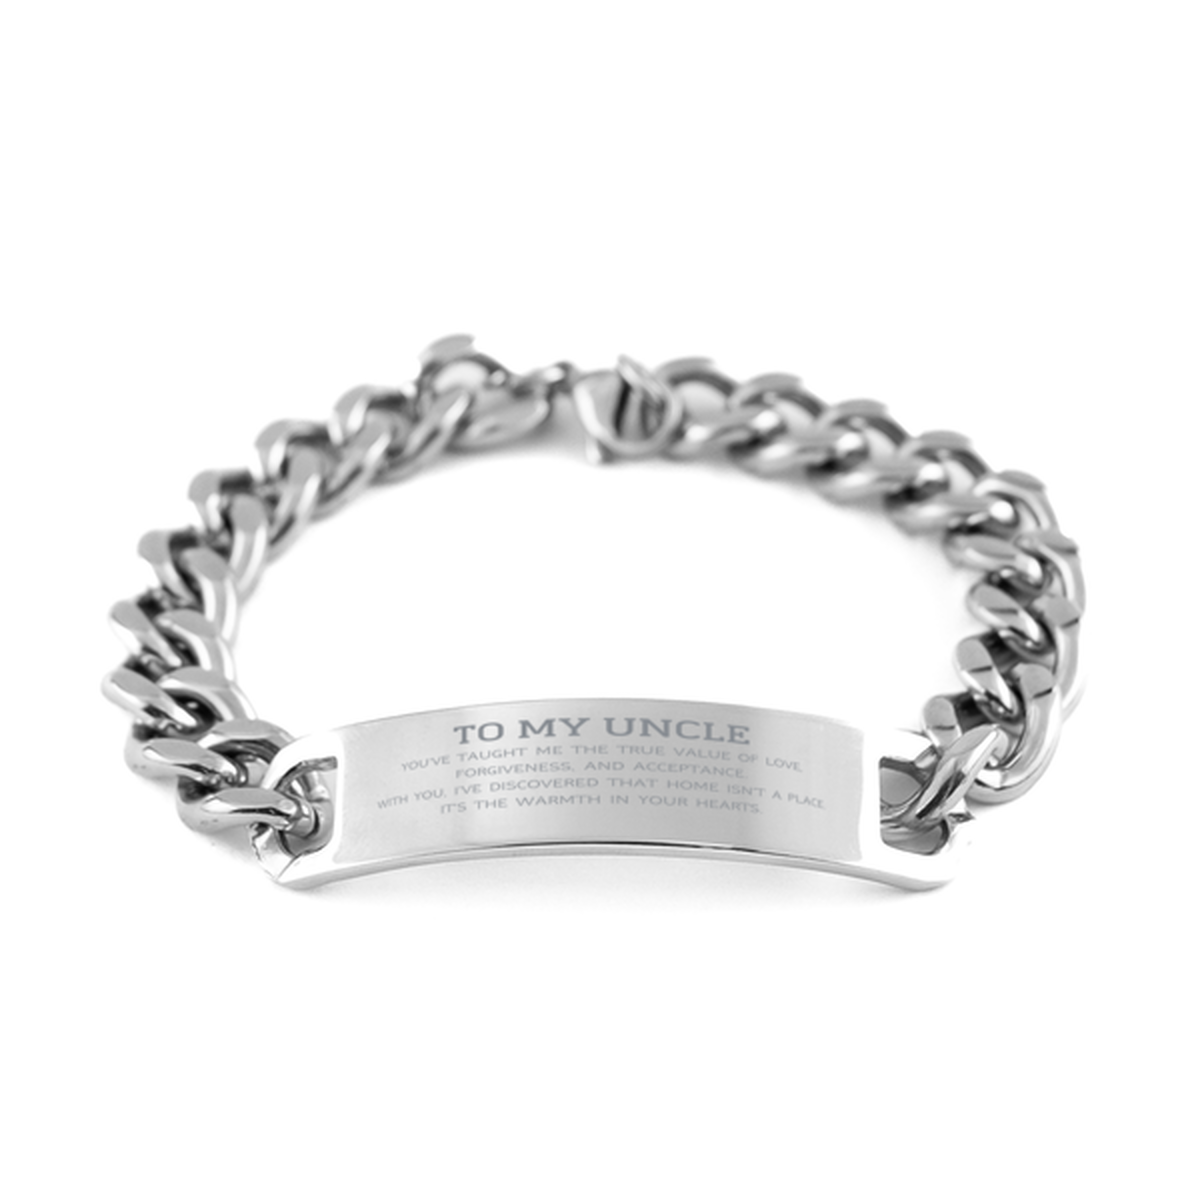 To My Uncle Gifts, You've taught me the true value of love, Thank You Gifts For Uncle, Birthday Cuban Chain Stainless Steel Bracelet For Uncle